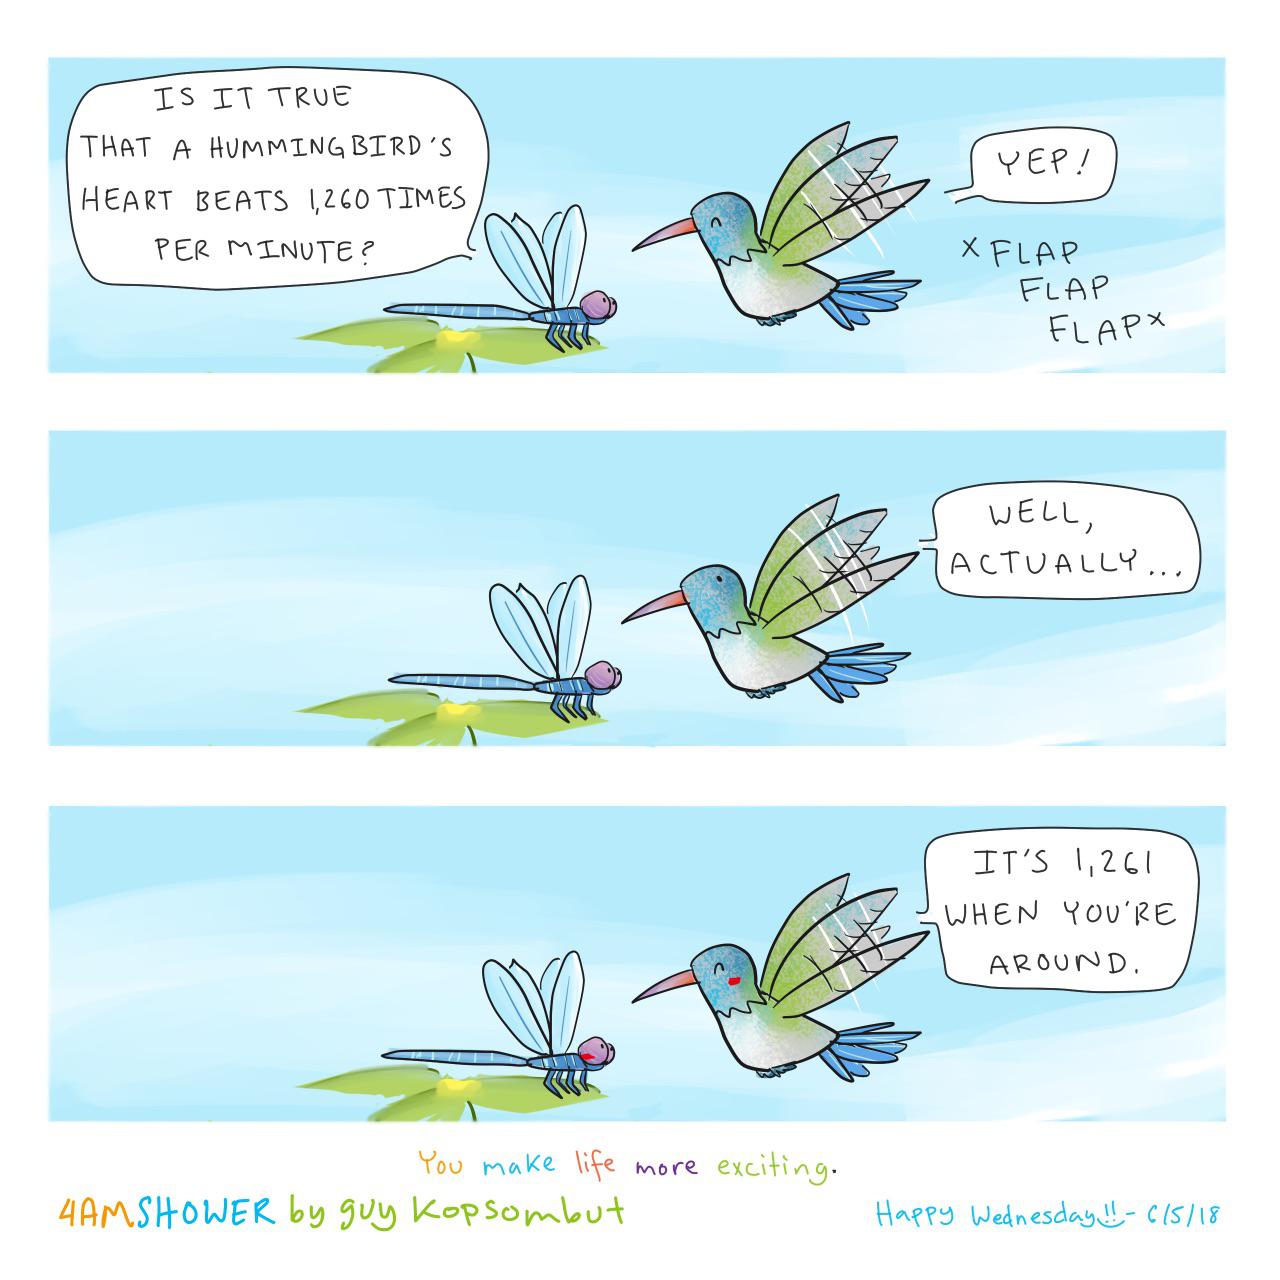 You make my heart flutter (from guykopsombut), Shower, Instagram Comics You make my heart flutter (from guykopsombut), Shower, Instagram text: 1 S T gue A HUMMING BIRD 'S HEART g€hTs I,ZCOTIMES YOO 4AnShOWE( by 